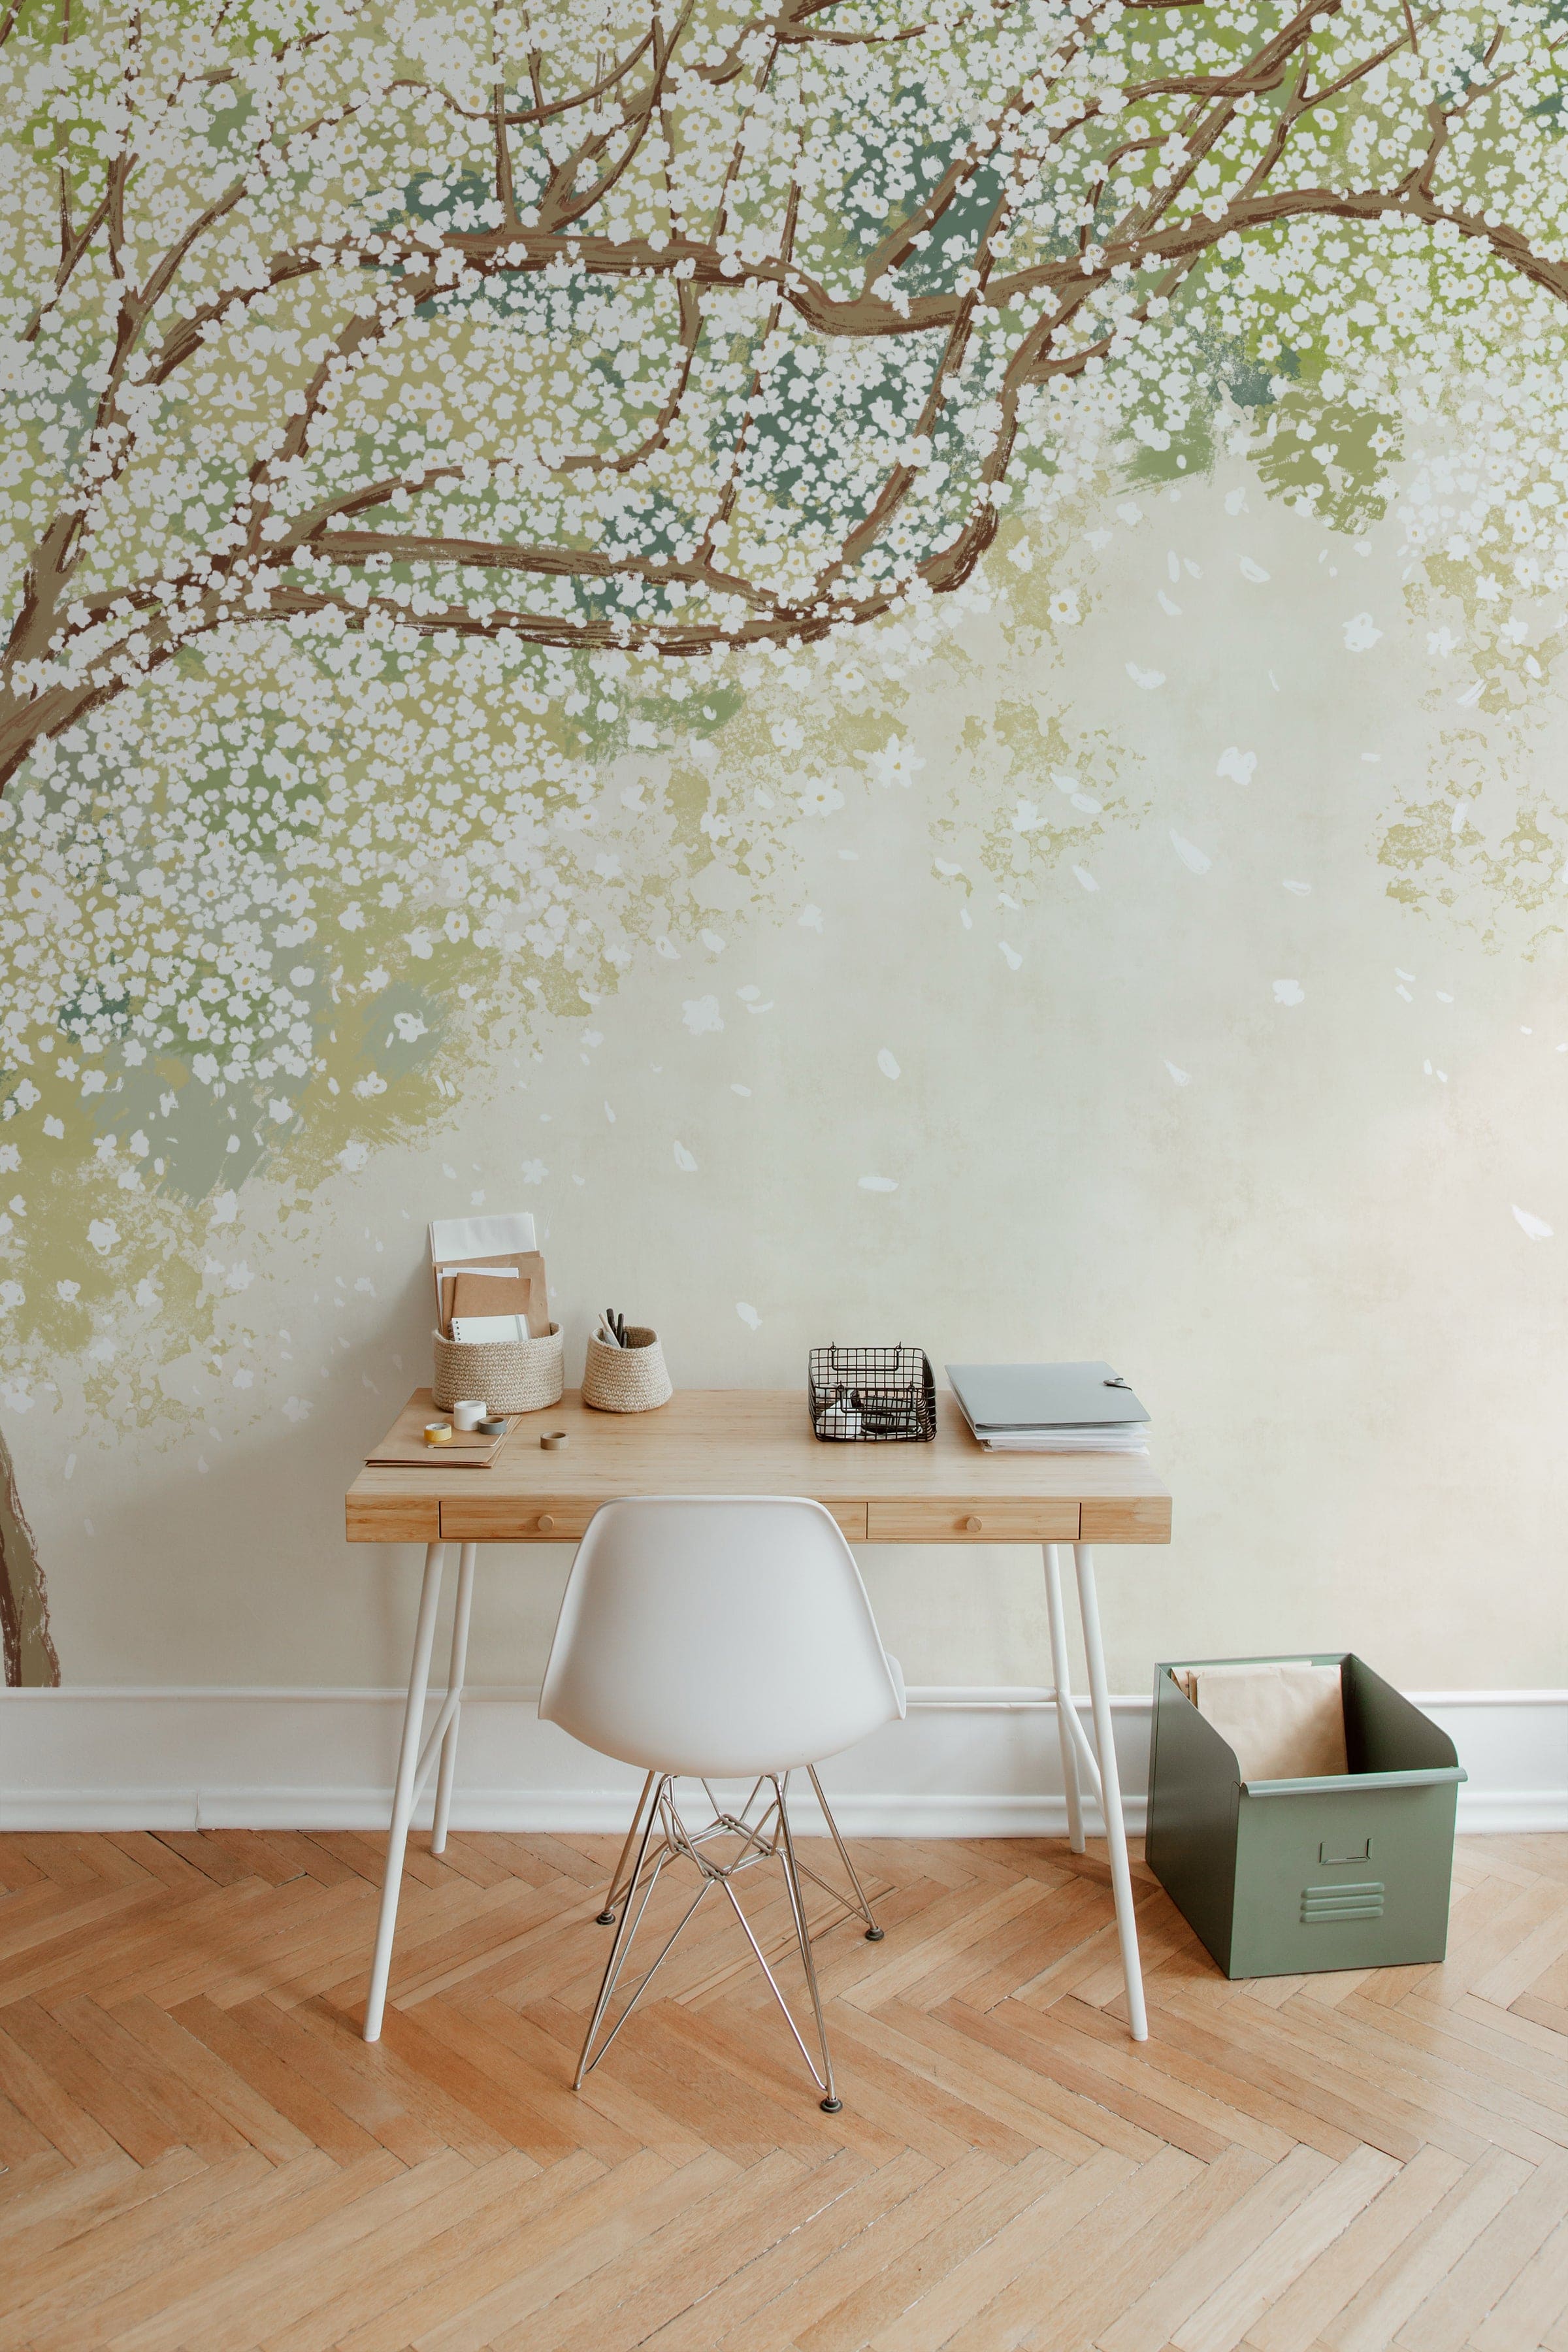 A serene home office setup with a wooden desk and white chair against a wall covered in a Sakura Serenade mural wallpaper. The wallpaper features delicate cherry blossom branches with white flowers set against a soft green and beige background, creating a peaceful and inspiring work environment.